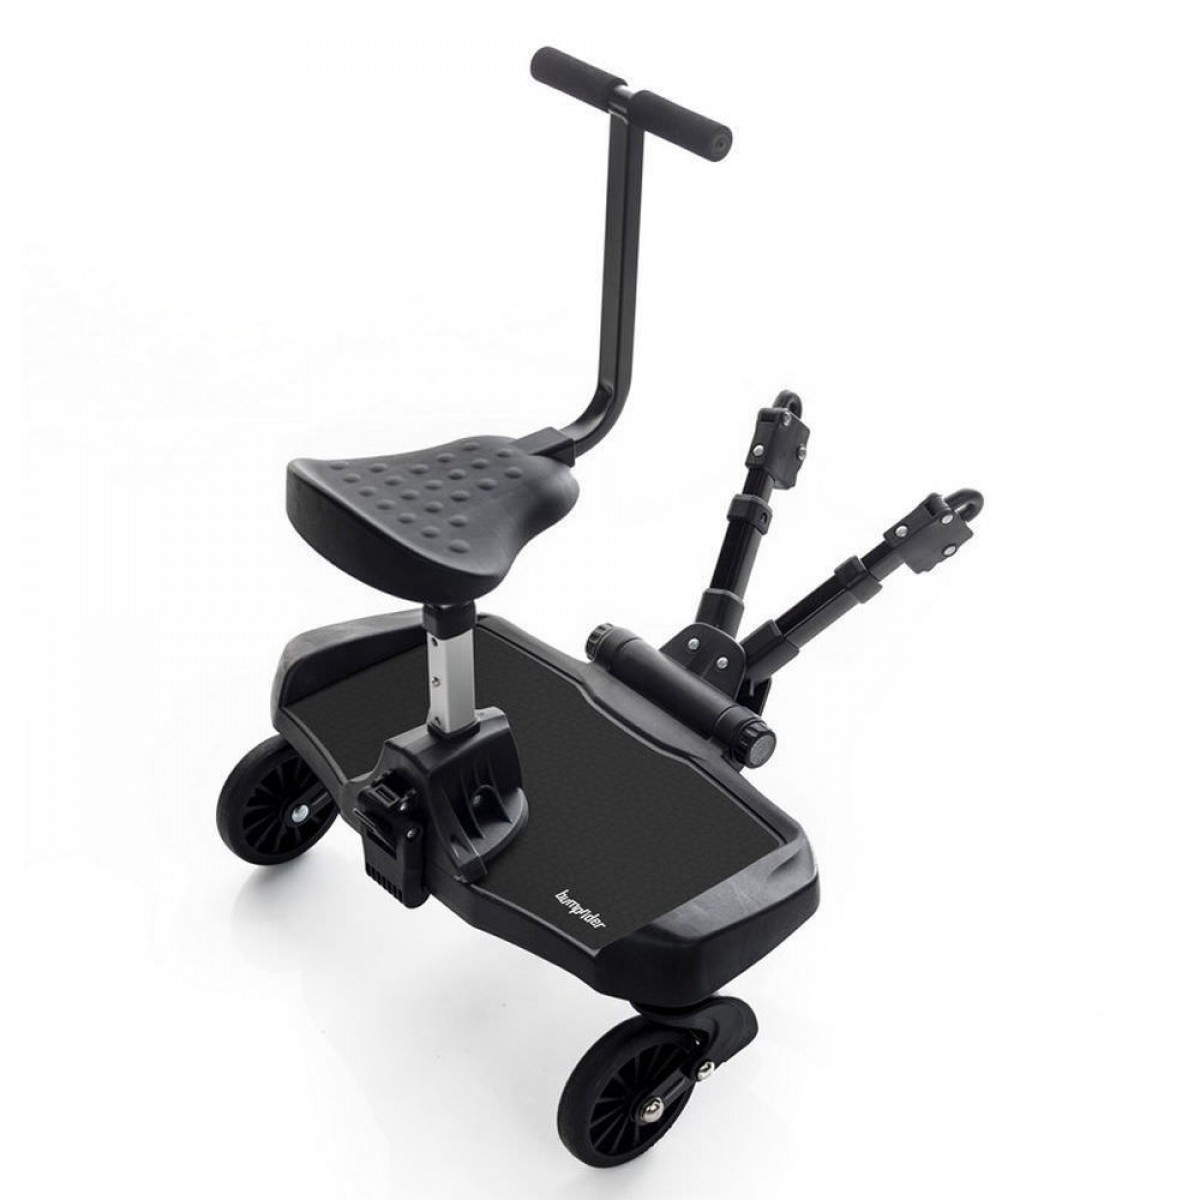 [CLEARANCE] Bumprider Stand On Board & Sit